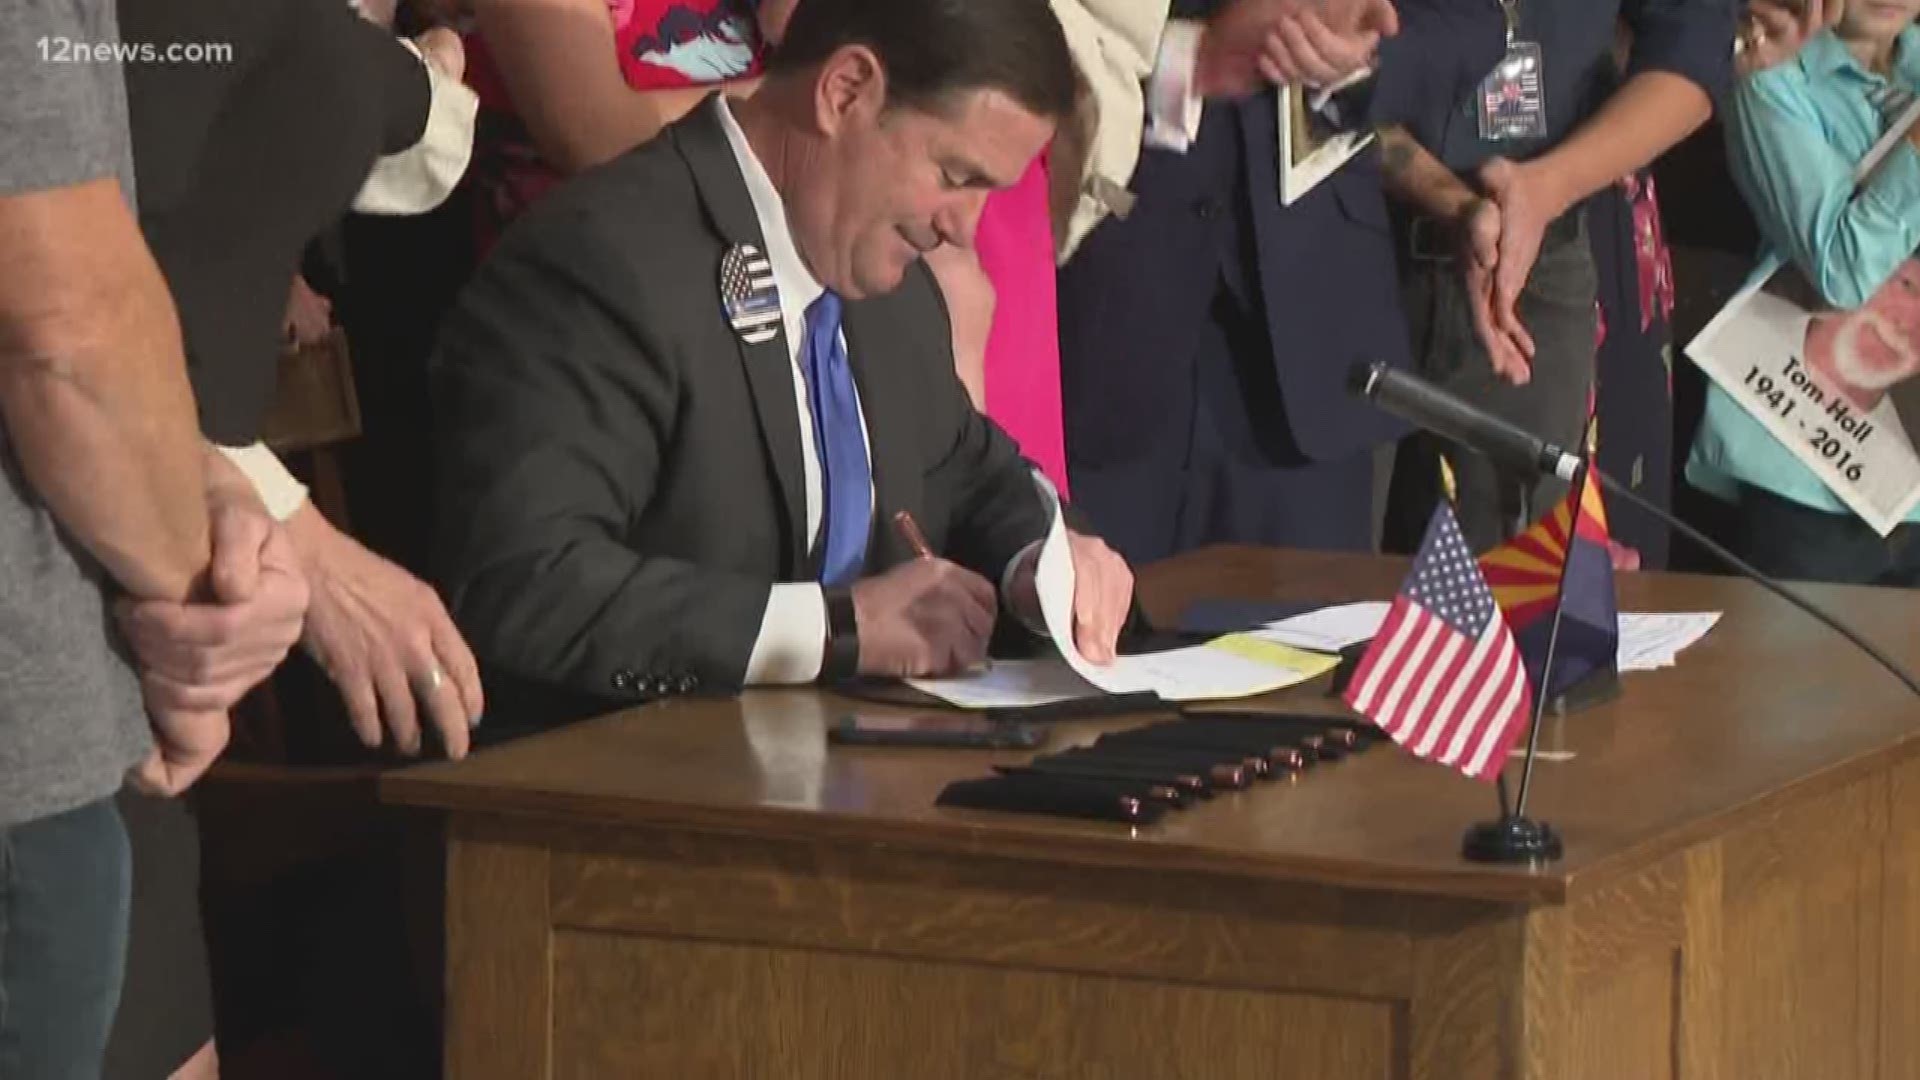 Arizona Governor Doug Ducey signed a bill banning texting and driving Monday. Officer Clayton Townsend's family, along with other families who had a loved one killed by a distracted driver, watched on as the governor signed the bill into law.